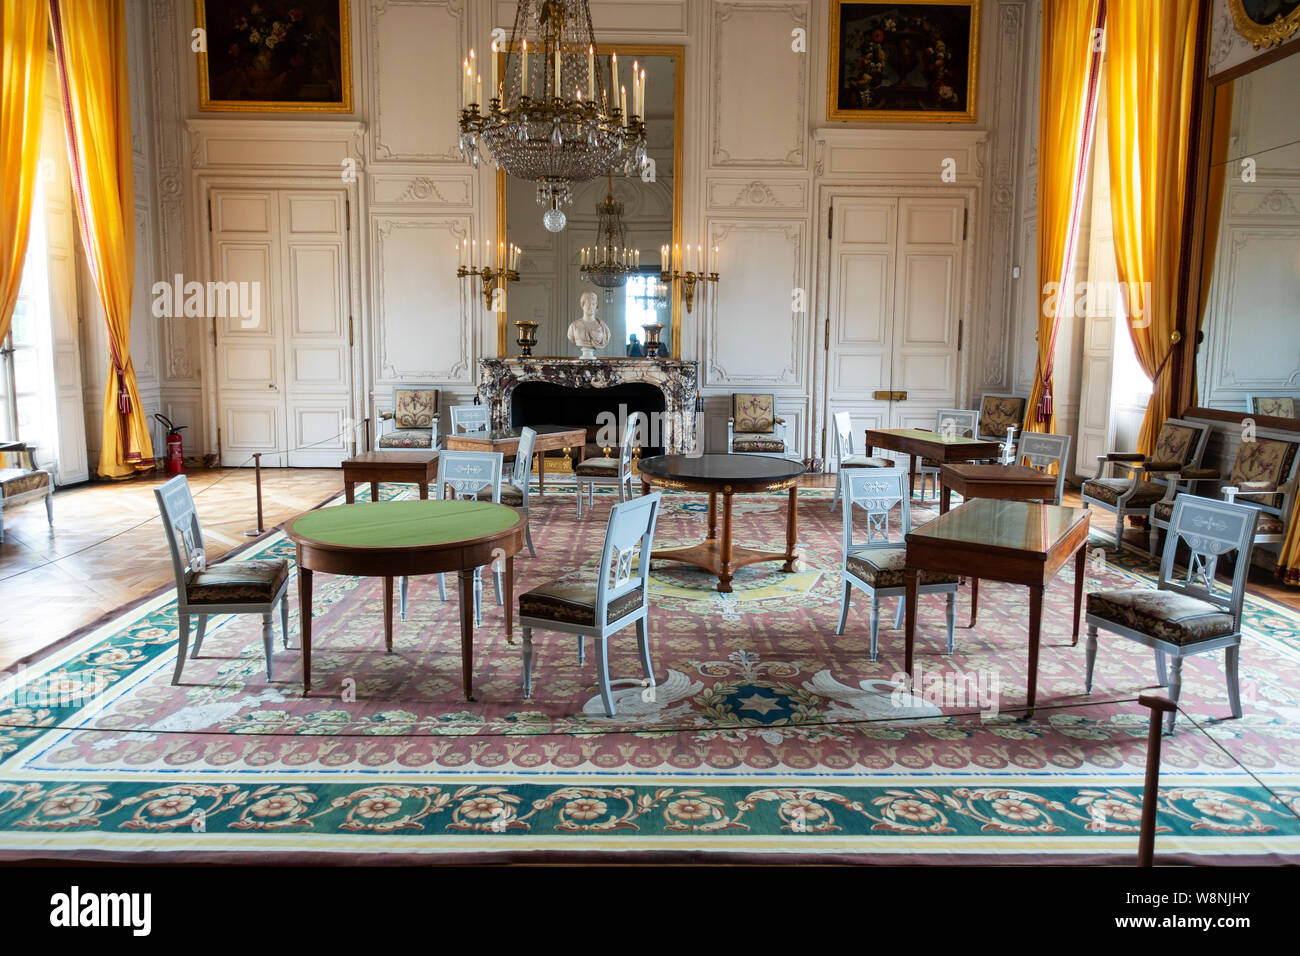 One of the many drawing rooms within The Grand Trianon Palace - Palace of Versailles, Yvelines, Île-de-France region of France Stock Photo